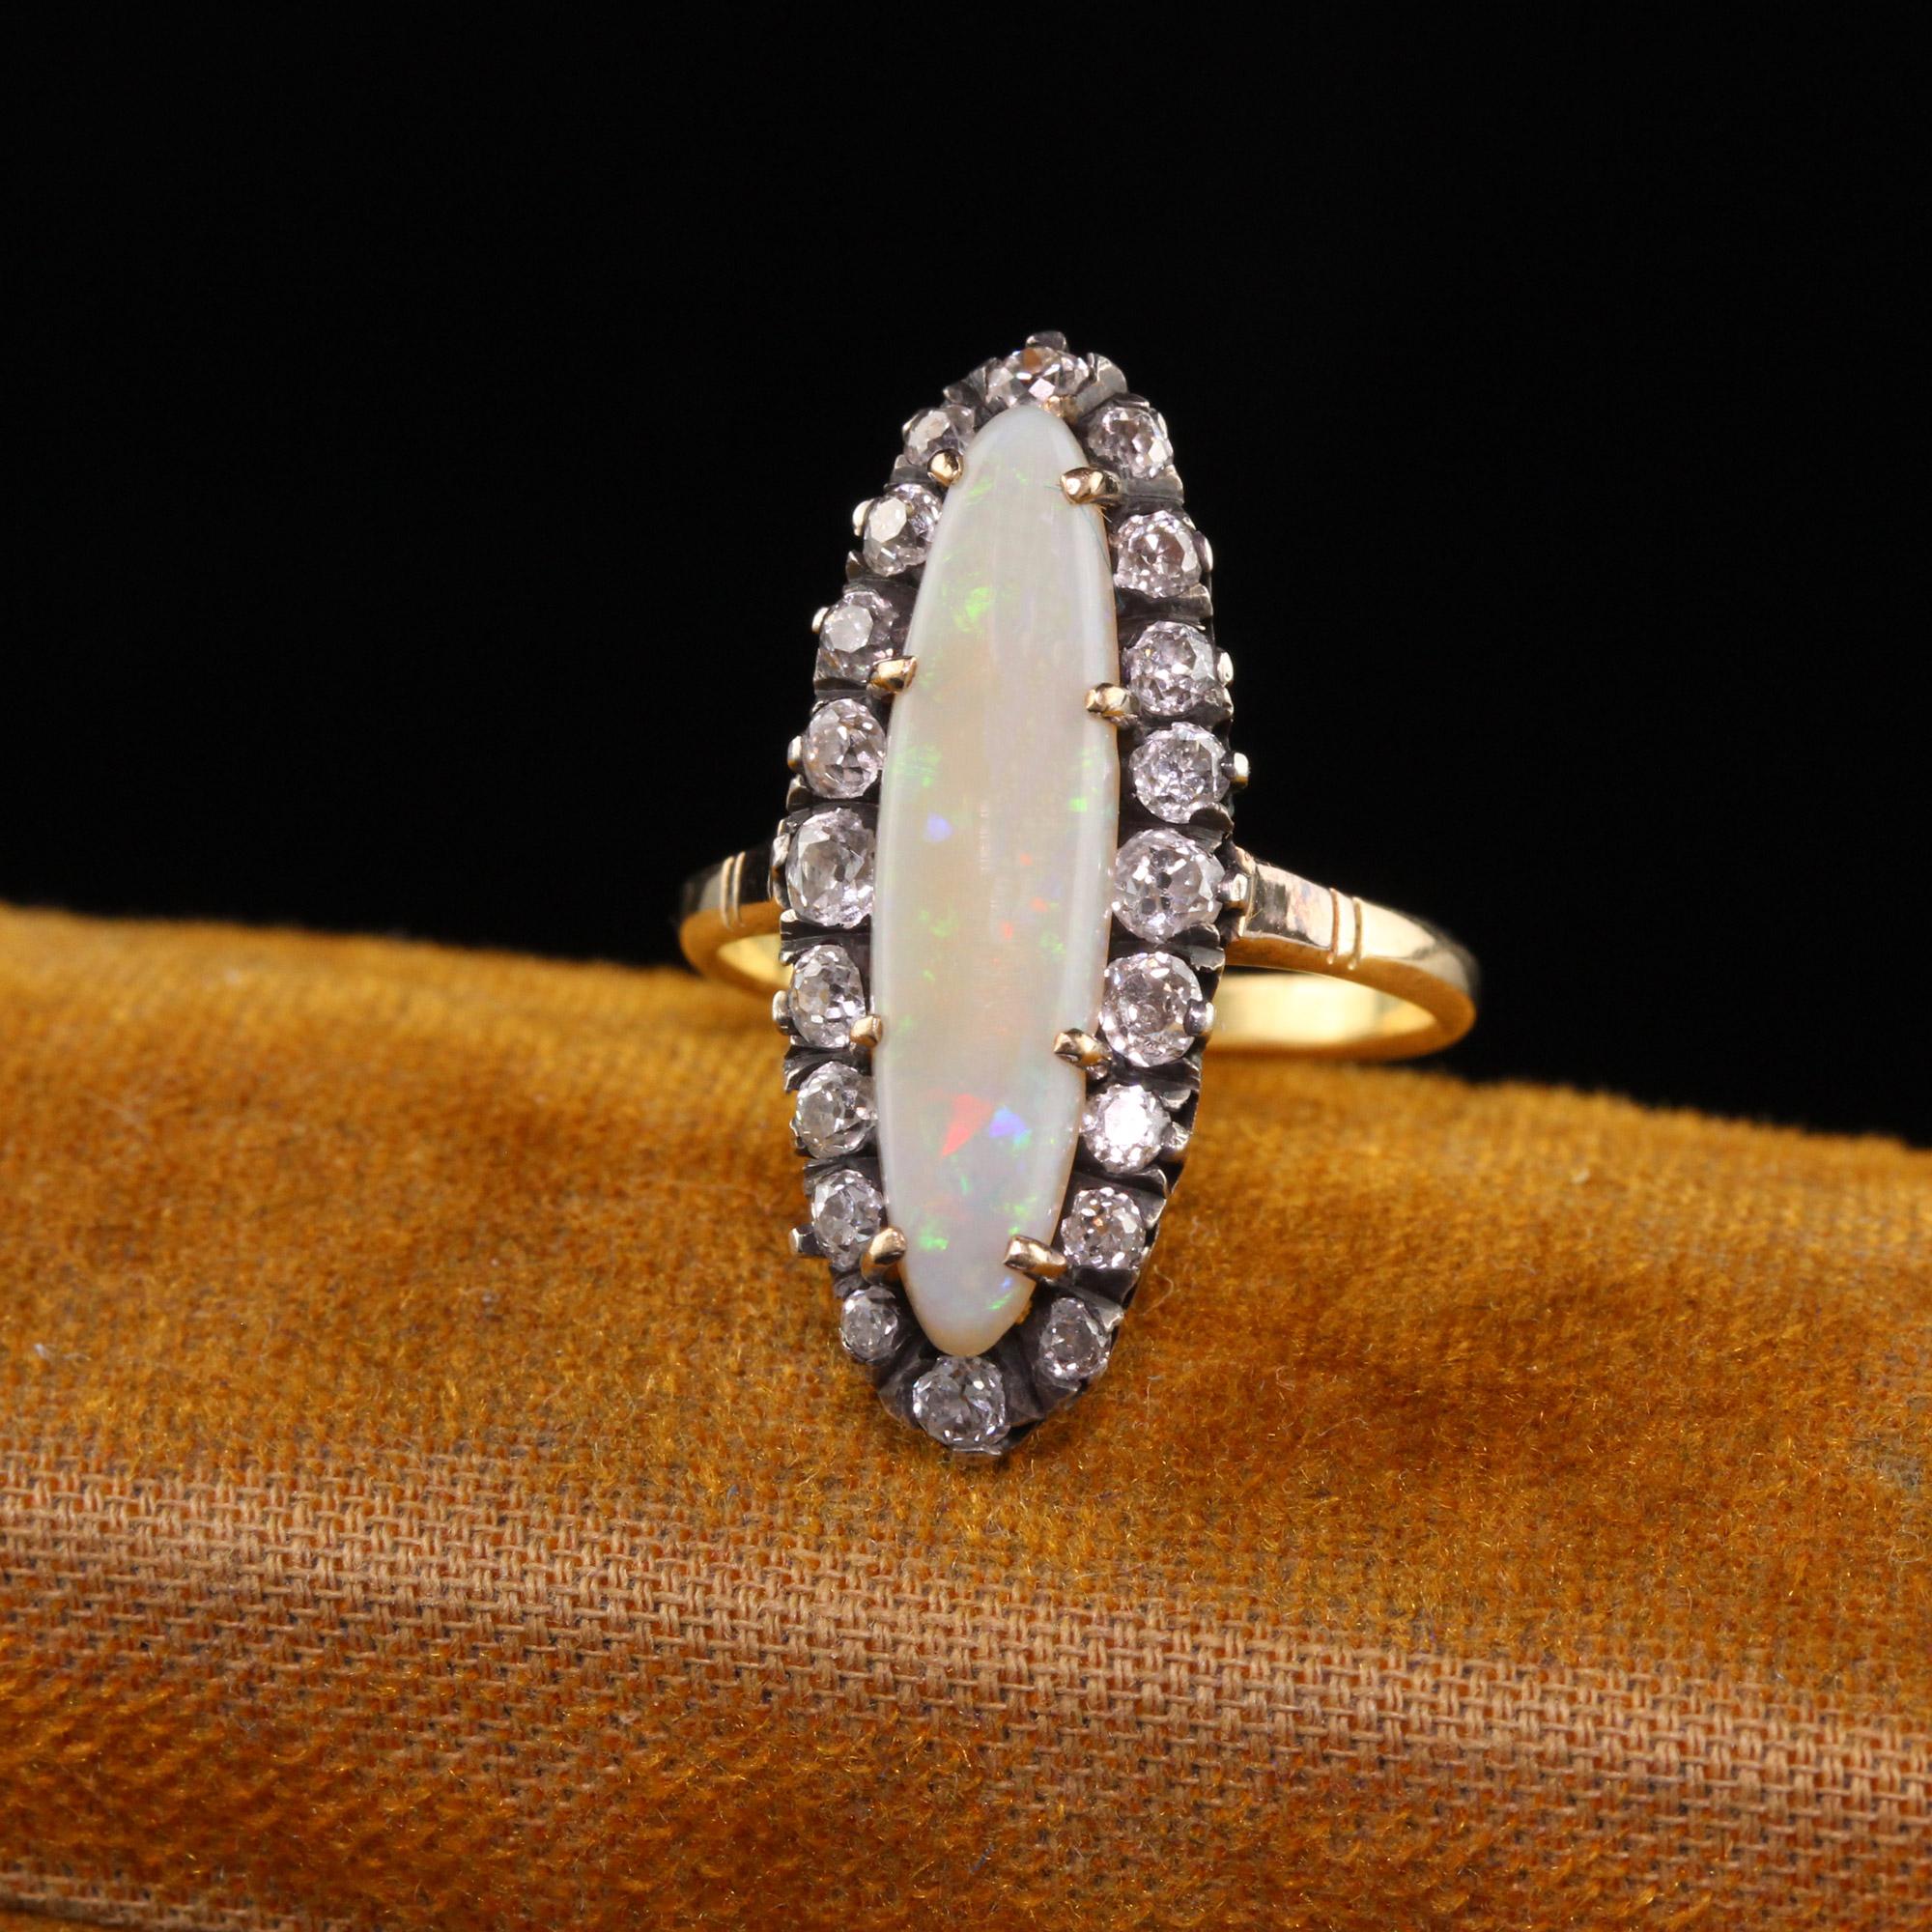 Beautiful Antique Victorian 14K Yellow Gold Silver Top Opal and Old Mine Diamond Ring. This gorgeous Victorian ring is crafted in 14k yellow gold and silver top. The center holds a long cabochon opal that has vibrant colors flashing in the sunlight.